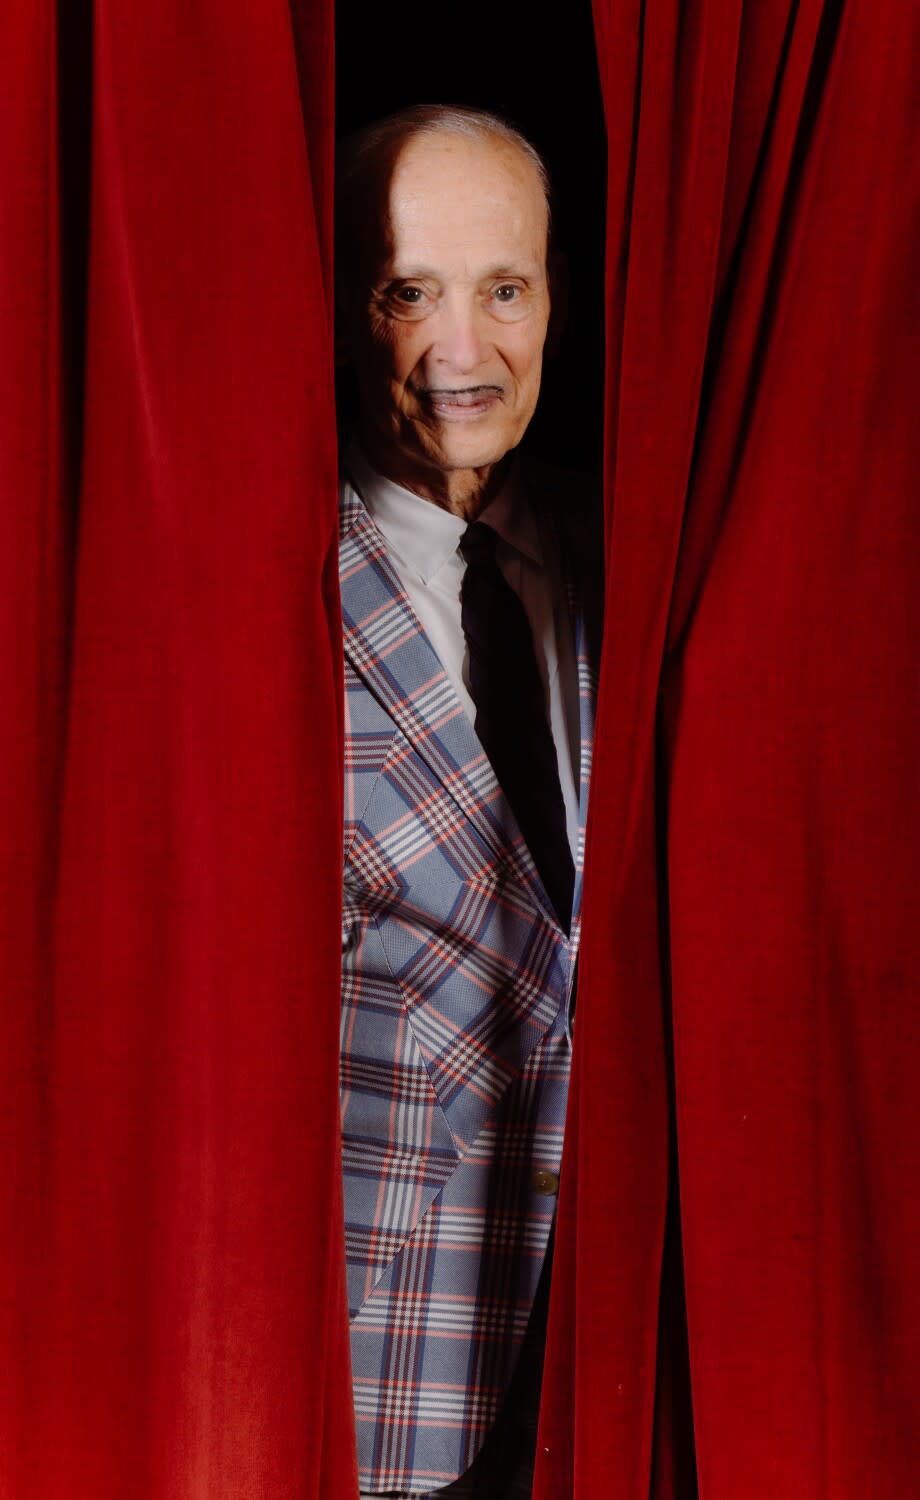 A man in a plaid suit peeks through red curtains.